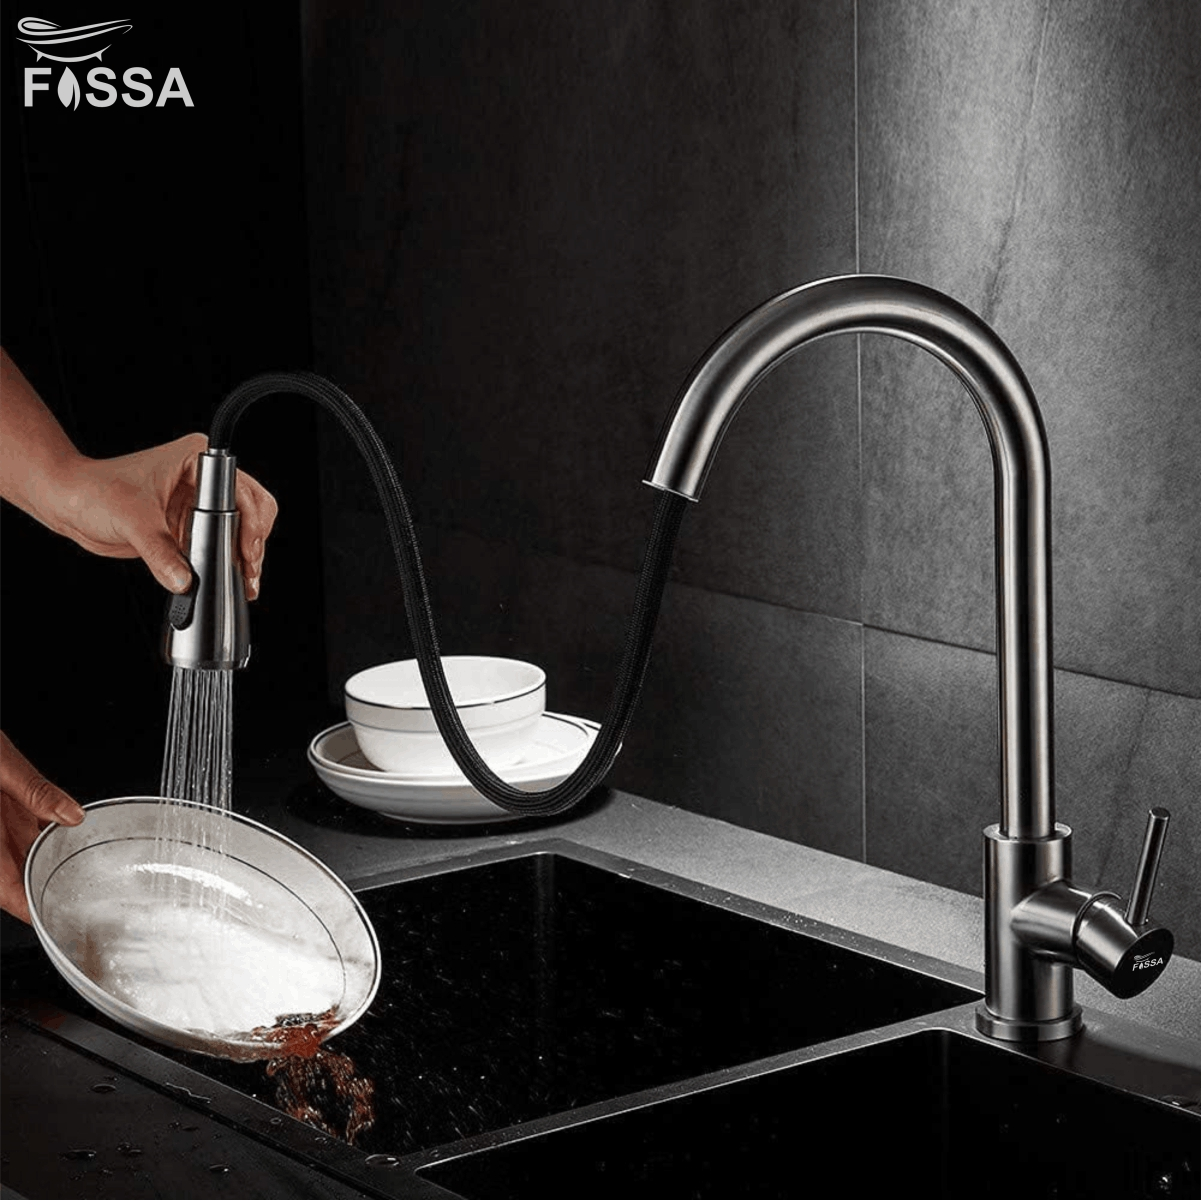 Fossa Kitchen Sink Mixer Tap with Pull Down Sprayer, Single Handle High Pull Out Kitchen Taps, Single Level Stainless Steel (Silver) - Fossa Home 